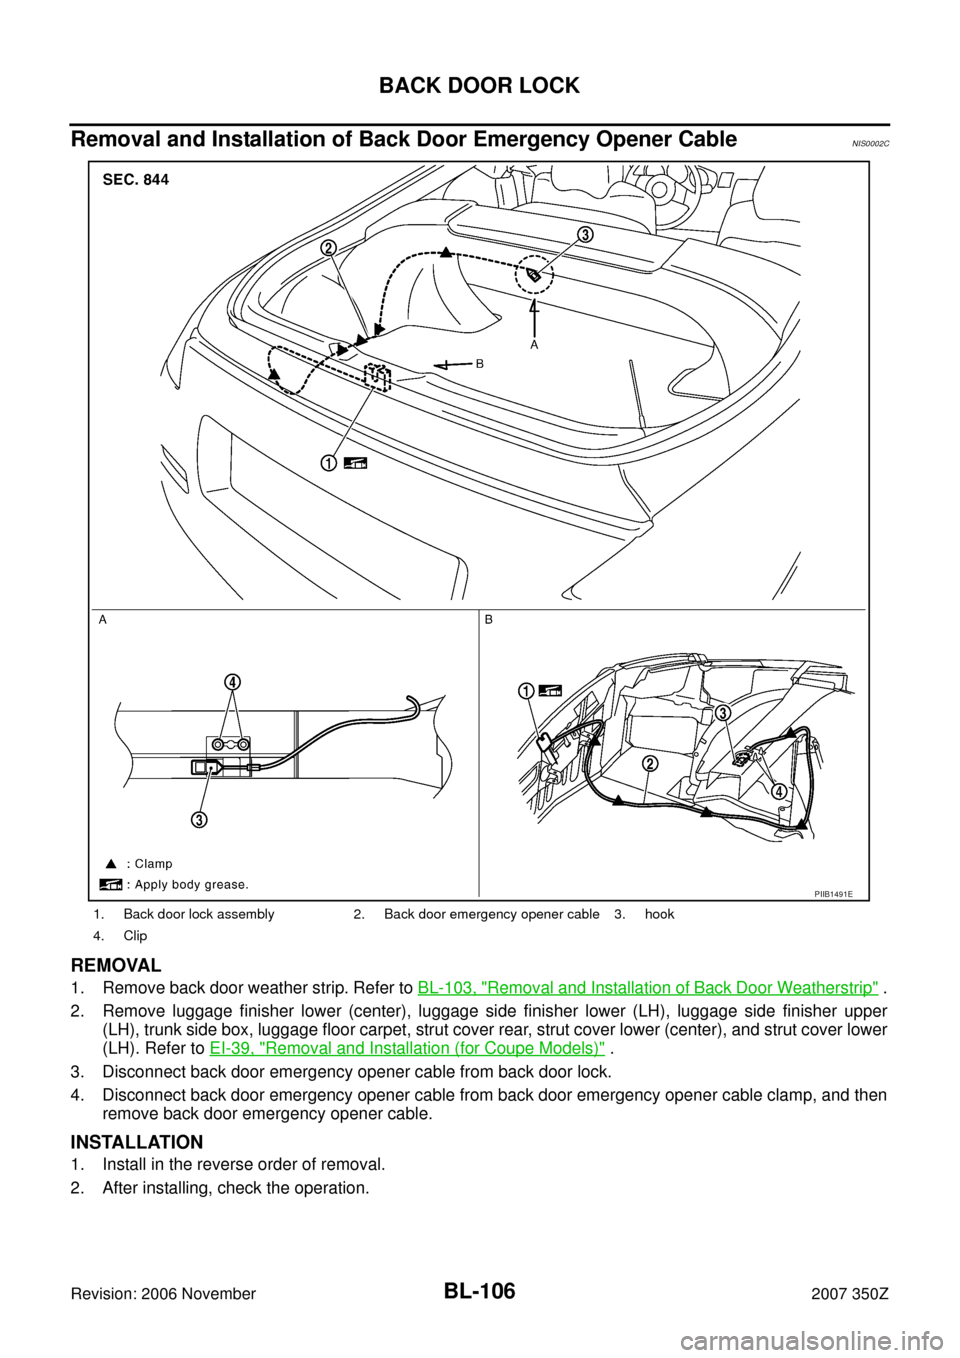 NISSAN 350Z 2007 Z33 Body, Lock And Security System Workshop Manual BL-106
BACK DOOR LOCK
Revision: 2006 November2007 350Z
Removal and Installation of Back Door Emergency Opener CableNIS0002C
REMOVAL
1. Remove back door weather strip. Refer to BL-103, "Removal and Ins